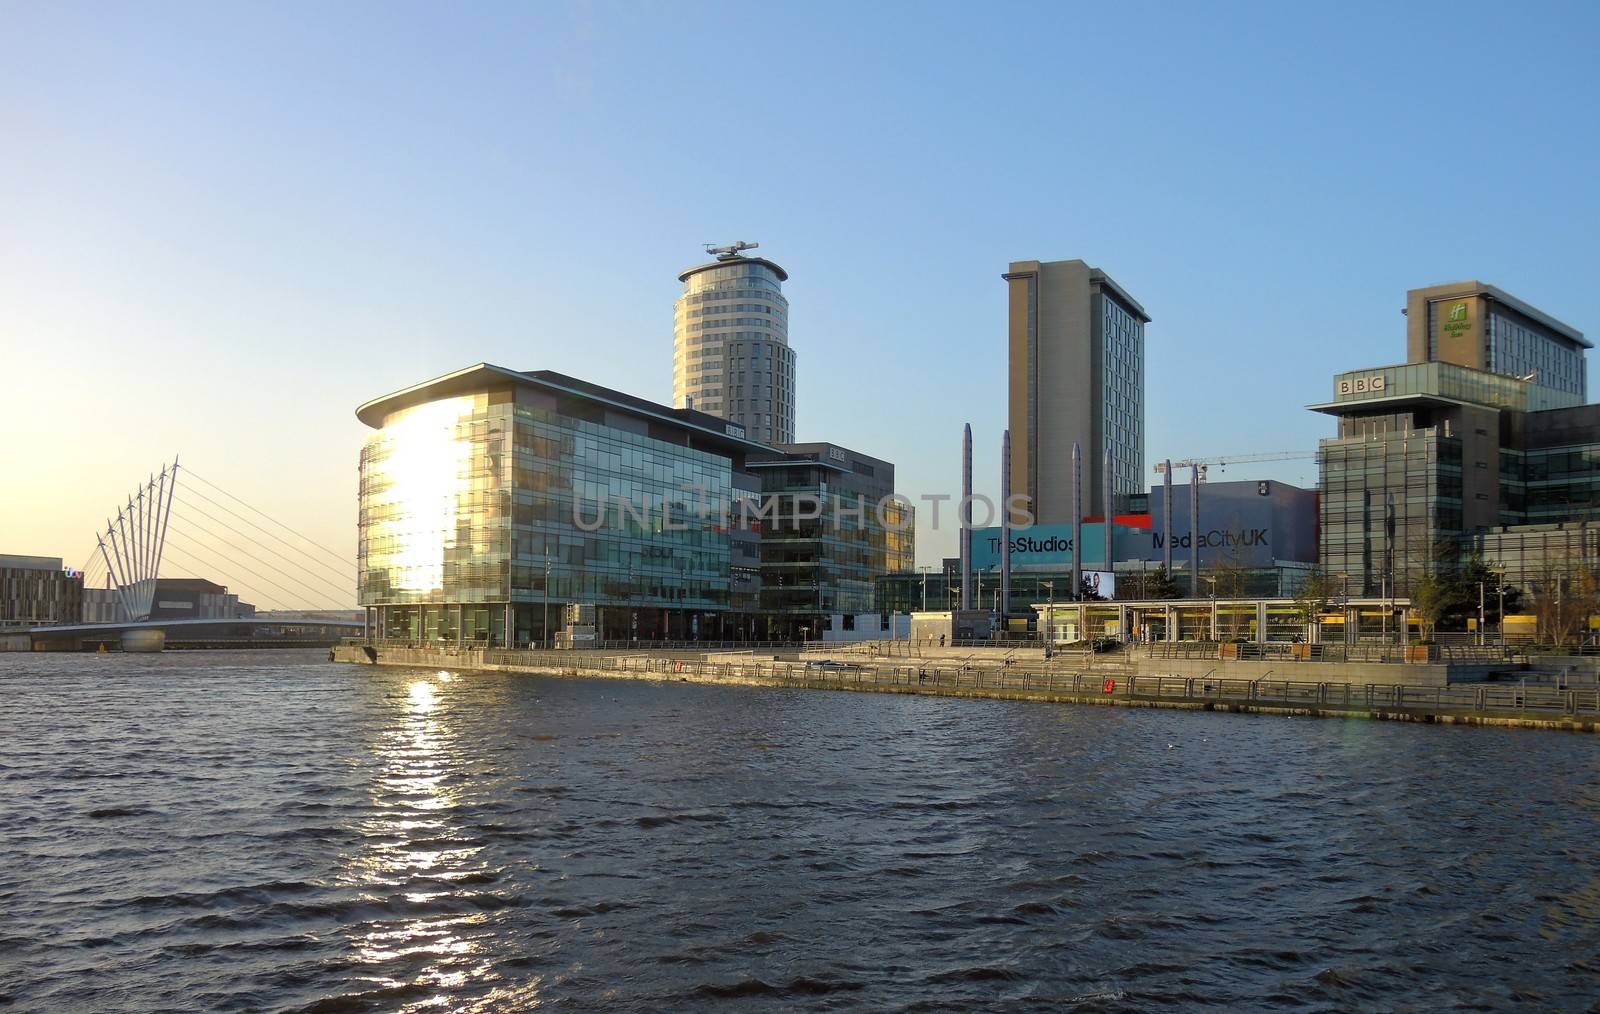 An image of television studios at Media City, Salford Quays, Greater Manchester.